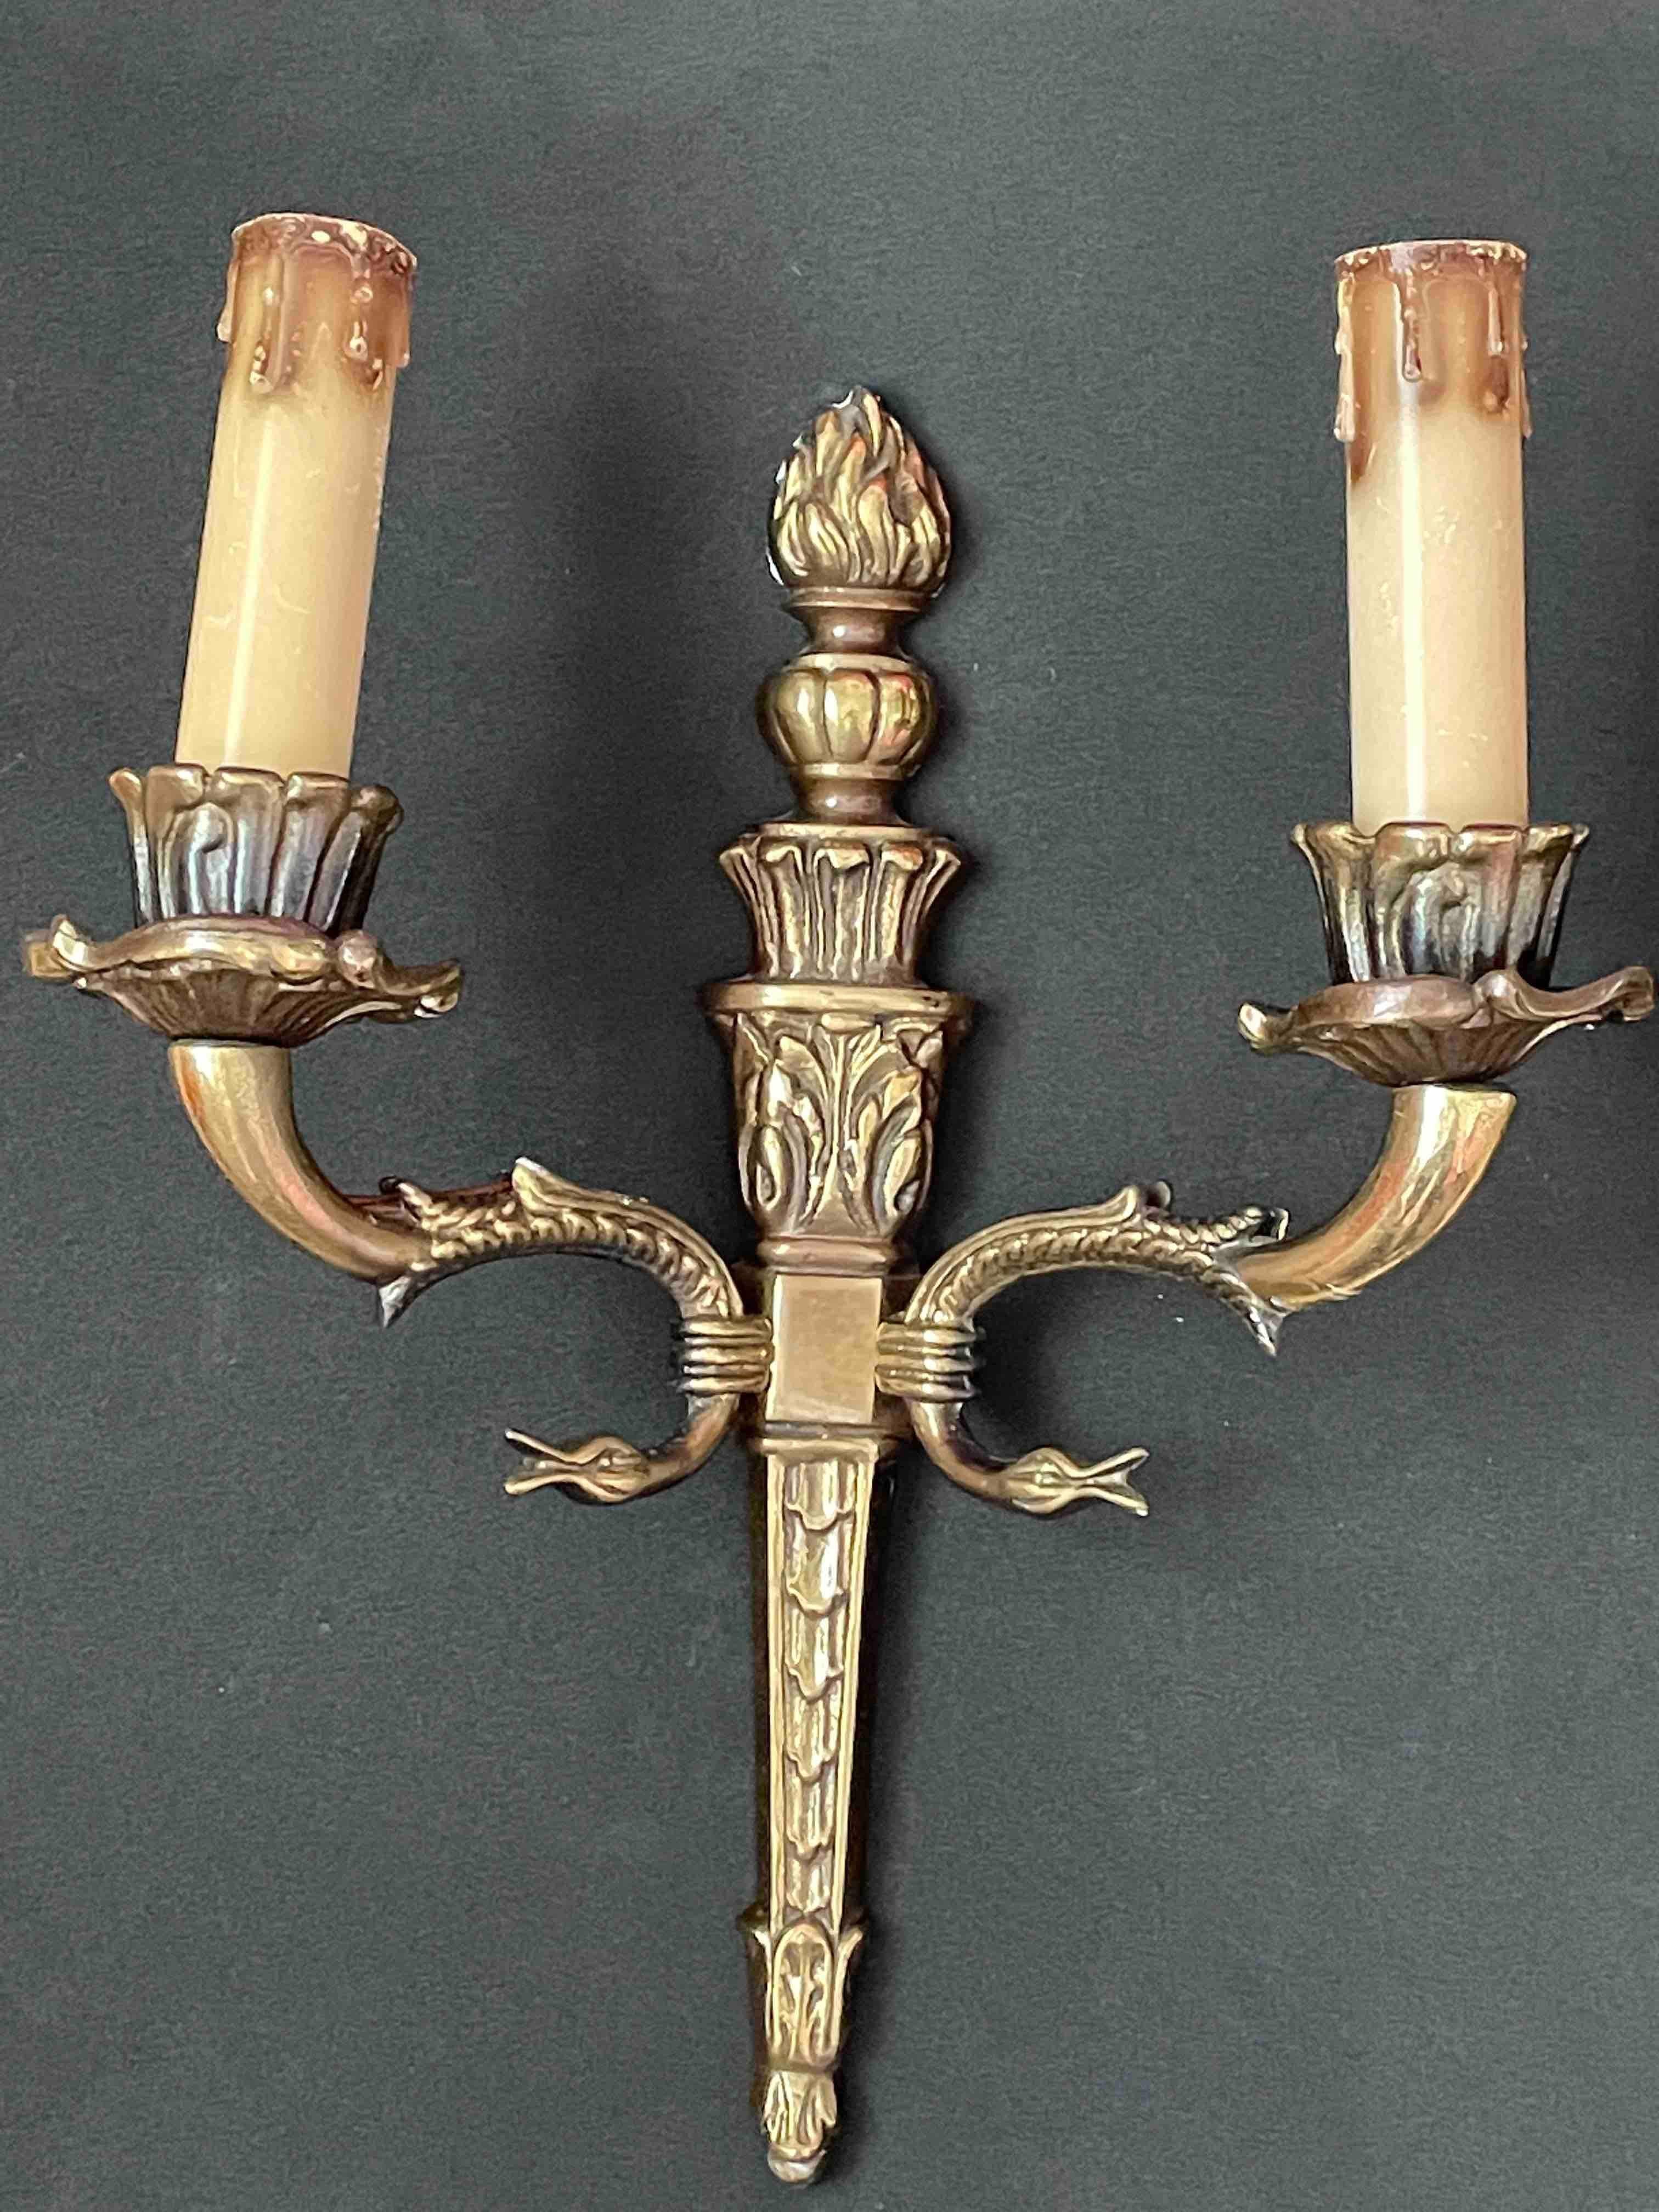 Pair of Empire Wall Sconces in Bronze with Swan Goose Motif Arms, Italy, 1950s For Sale 4